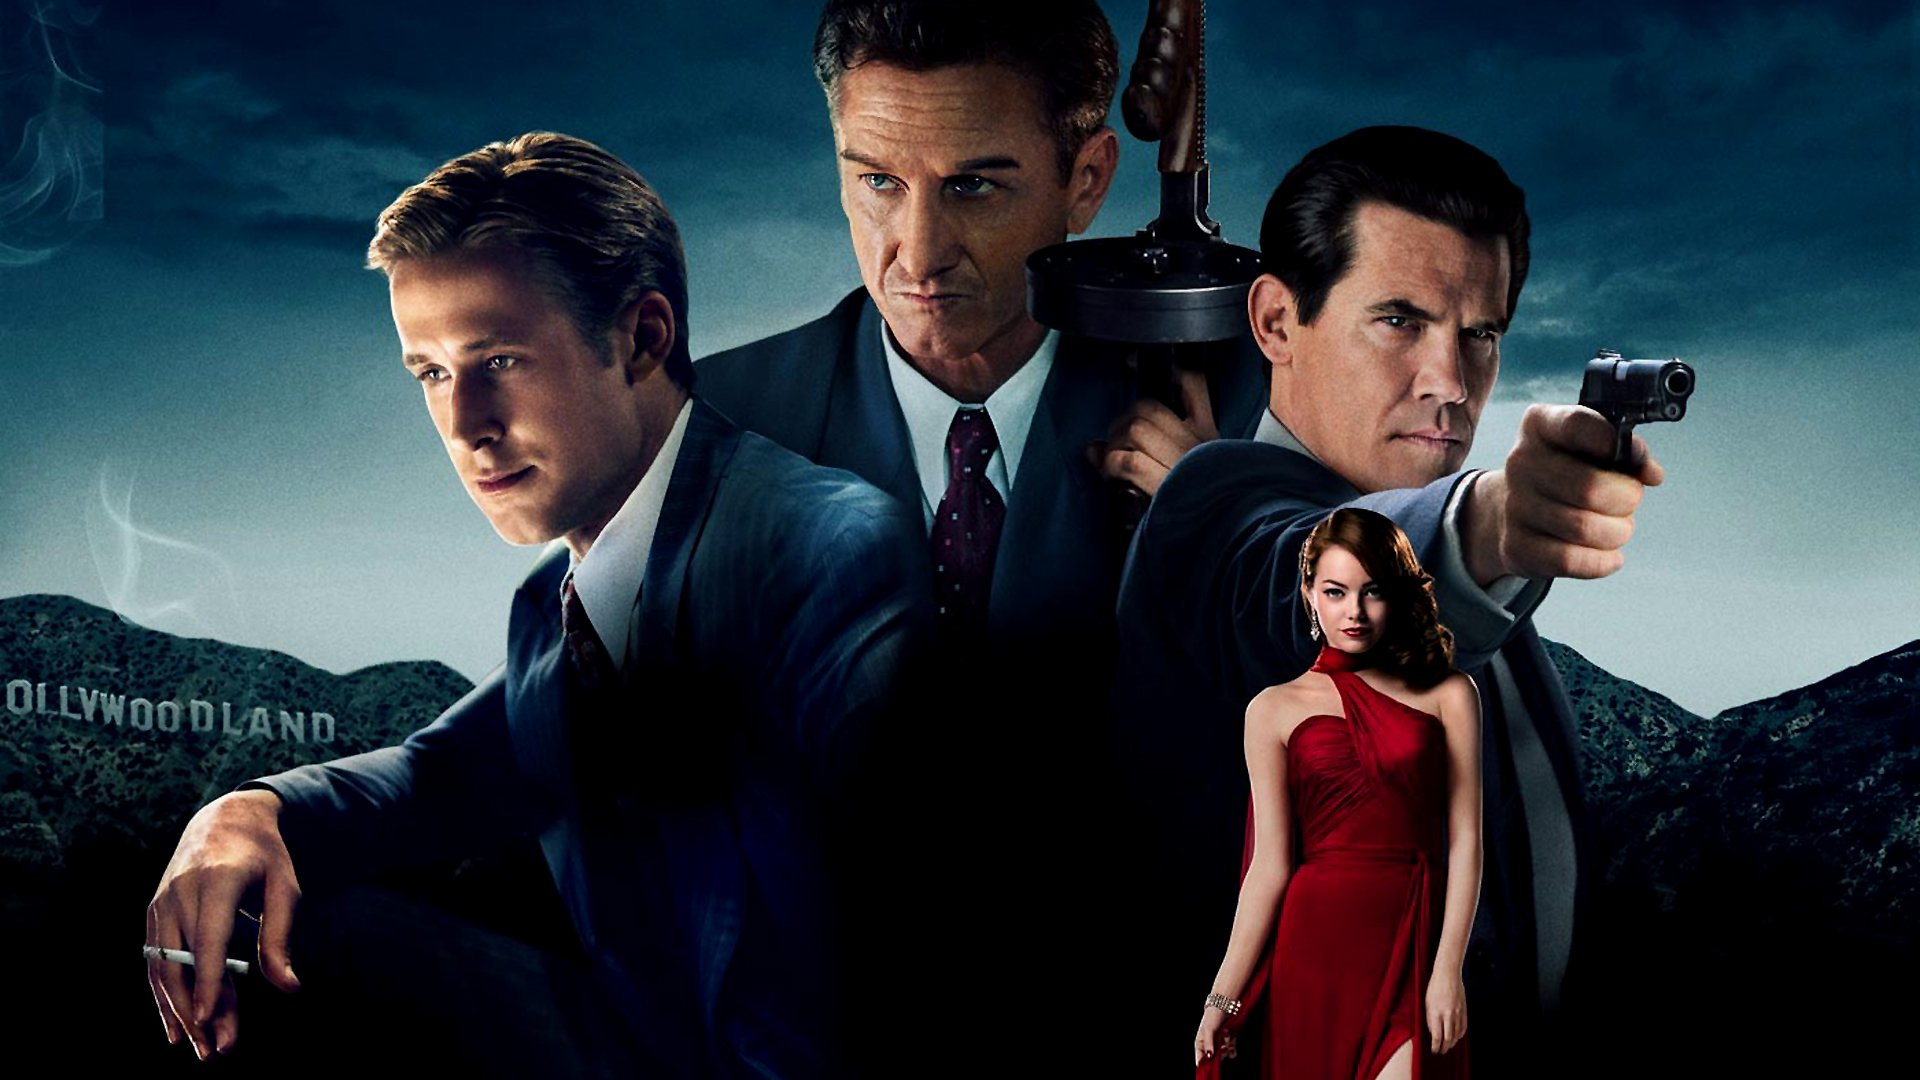 Gangster Squad Wallpapers